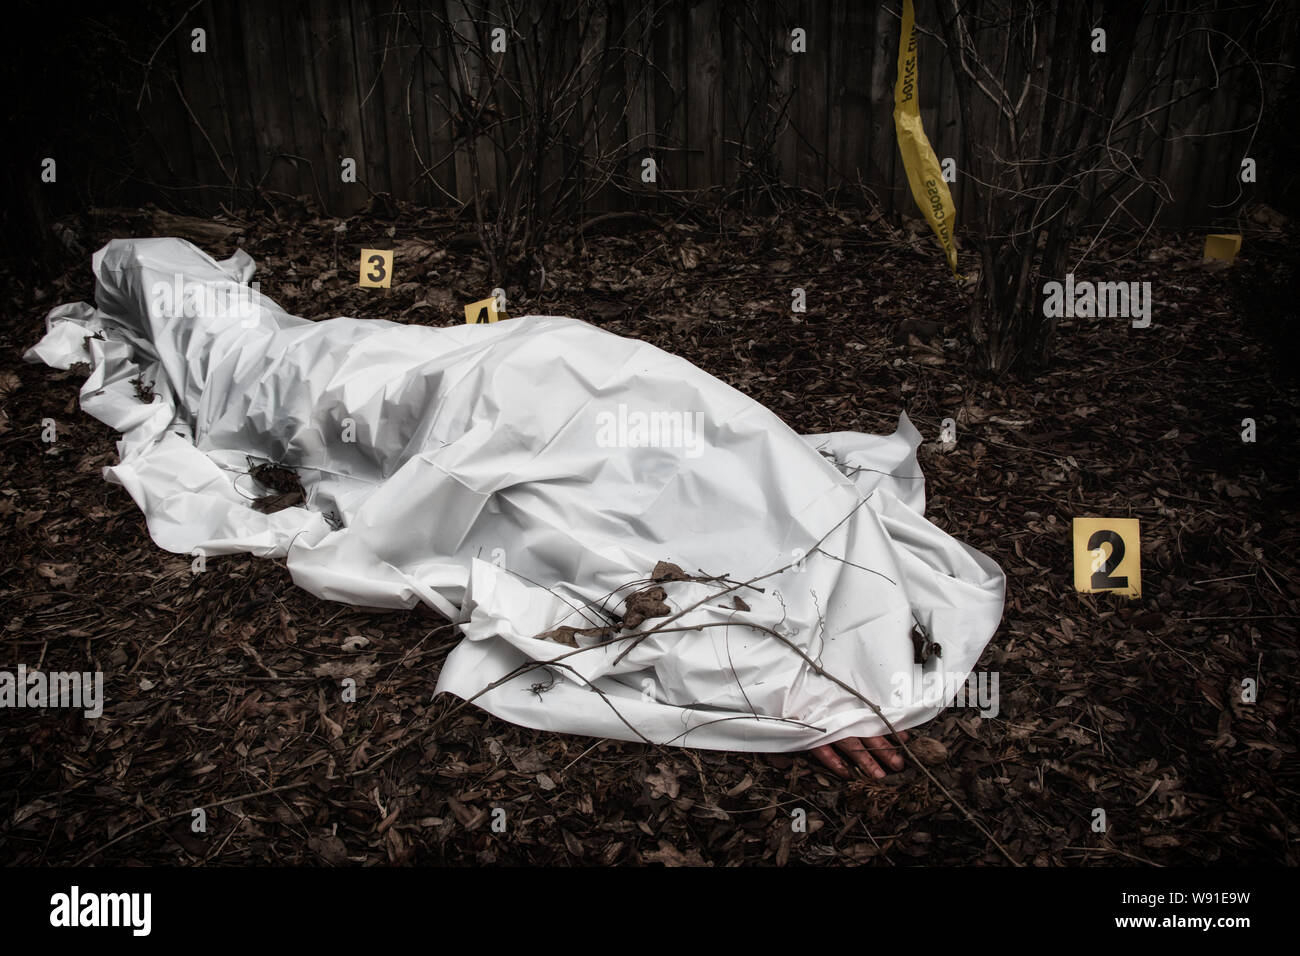 Victim of a violent crime under a sheet in a rural yard. With evidence markers. Stock Photo